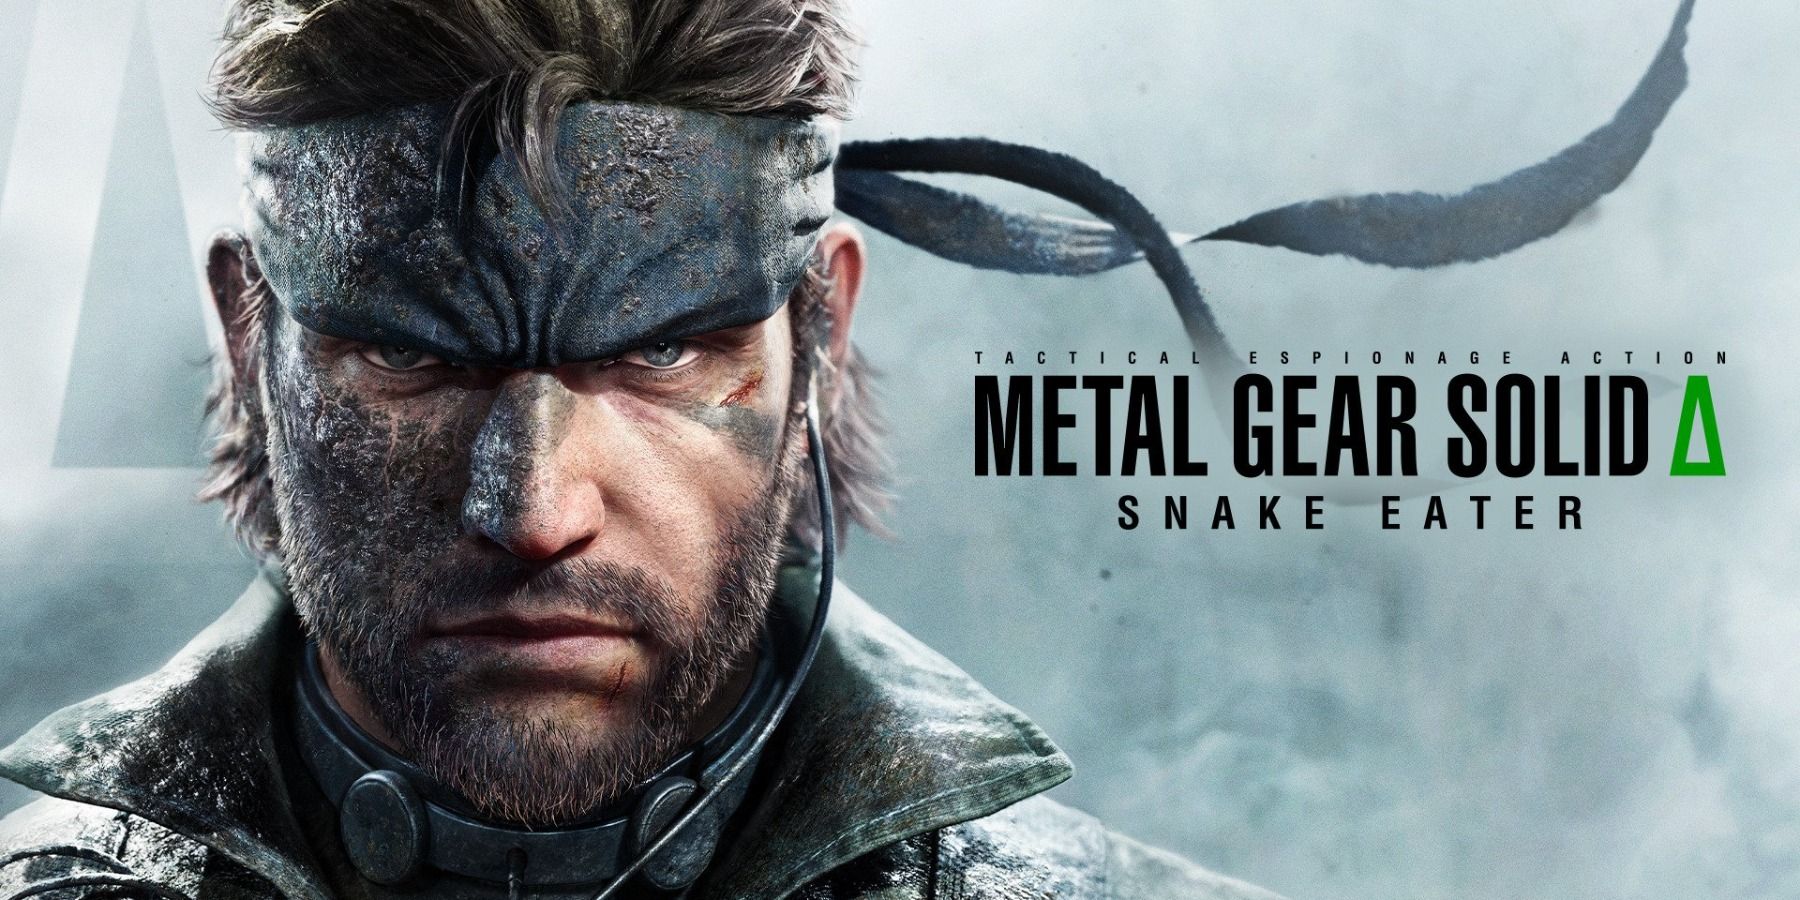 Metal Gear Solid Delta: Every Game Developer Virtuos Studios Has Worked On